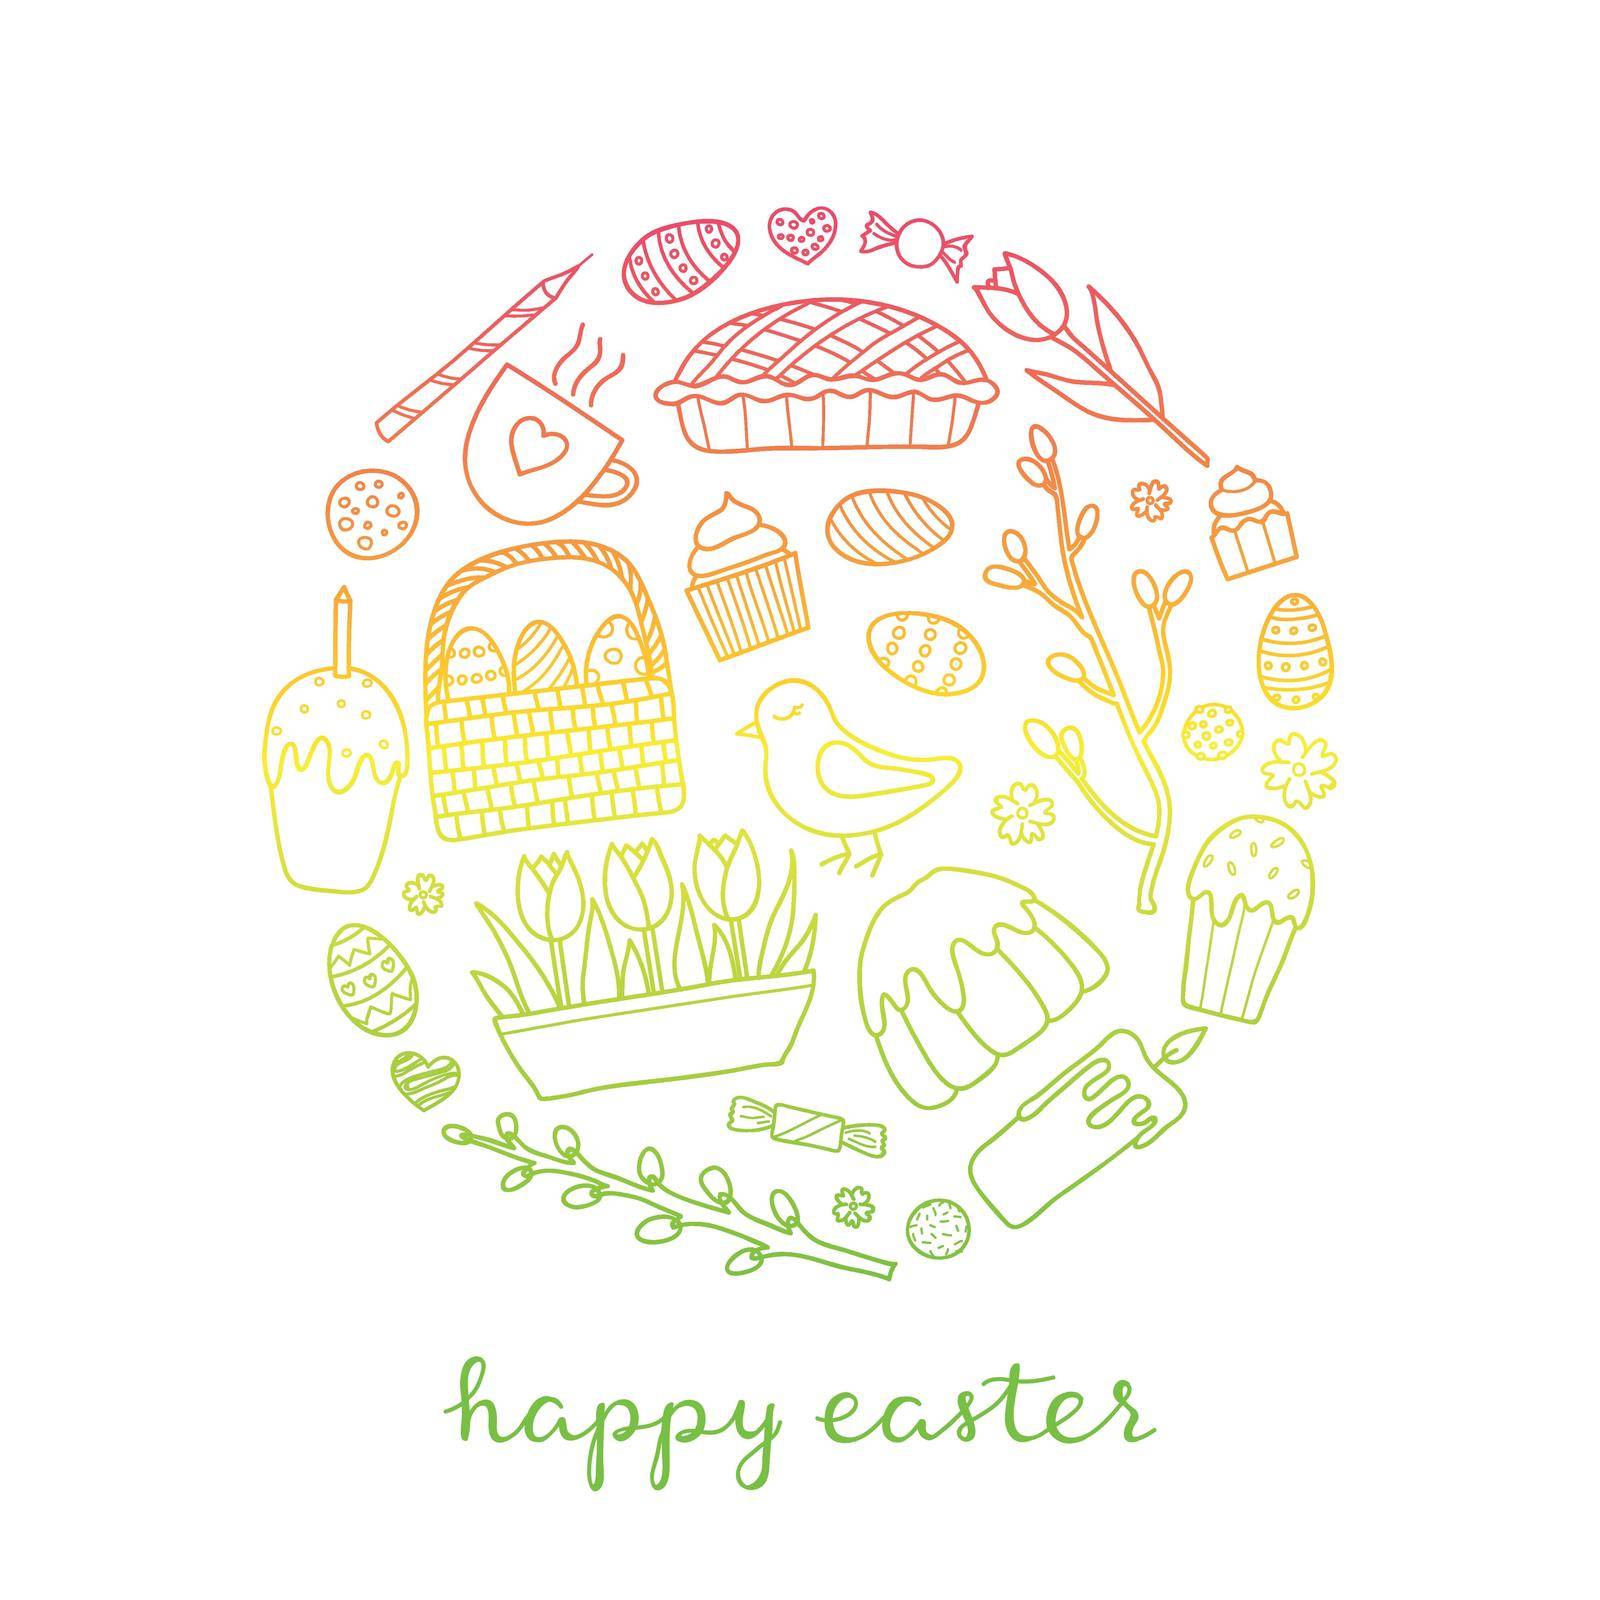 Doodle easter items in circle. by Minur